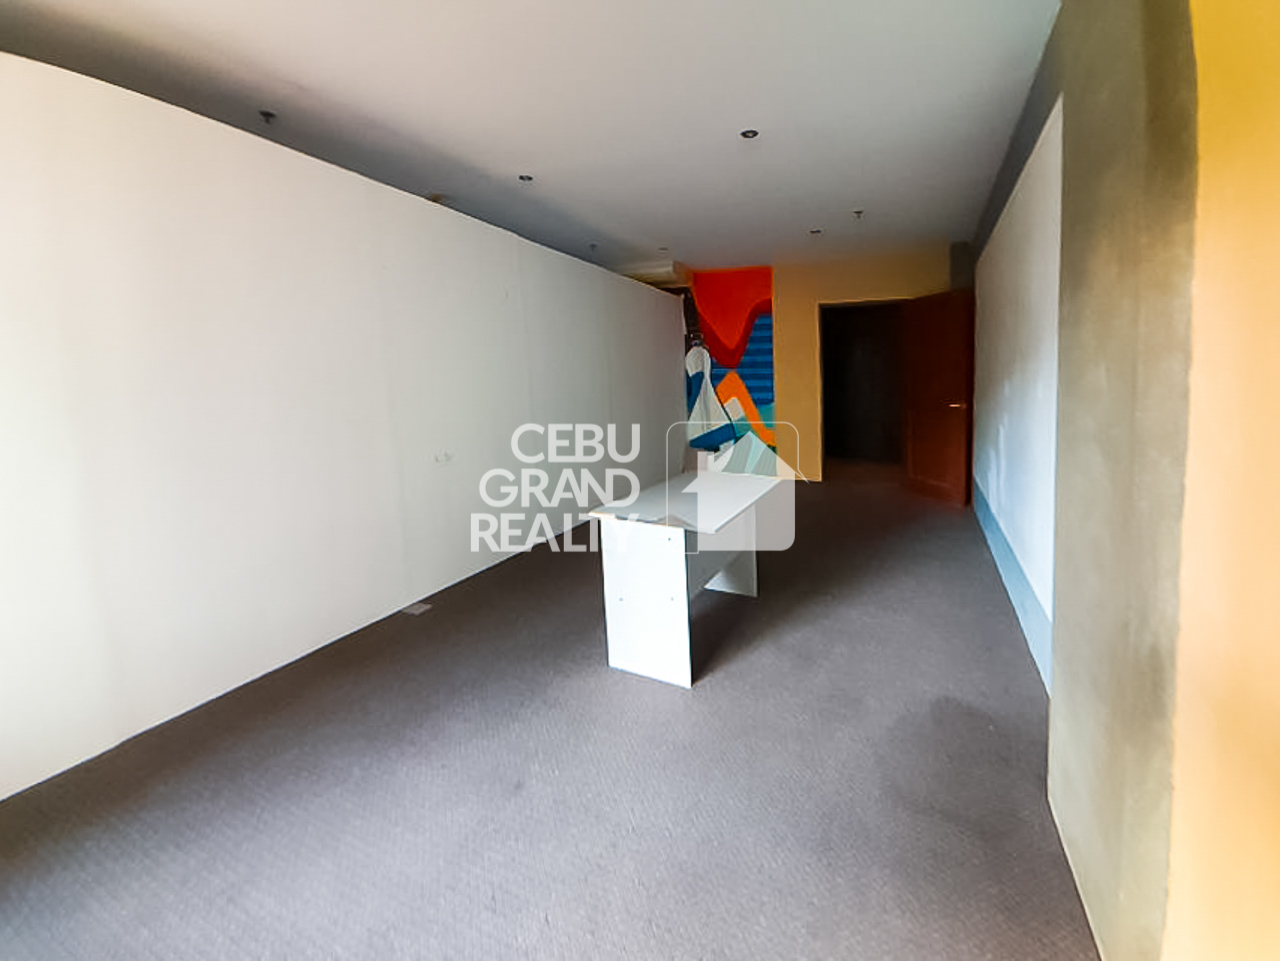 RCPHH3 24 SqM Office Space for Rent in Banilad - Cebu Grand Realty (2)